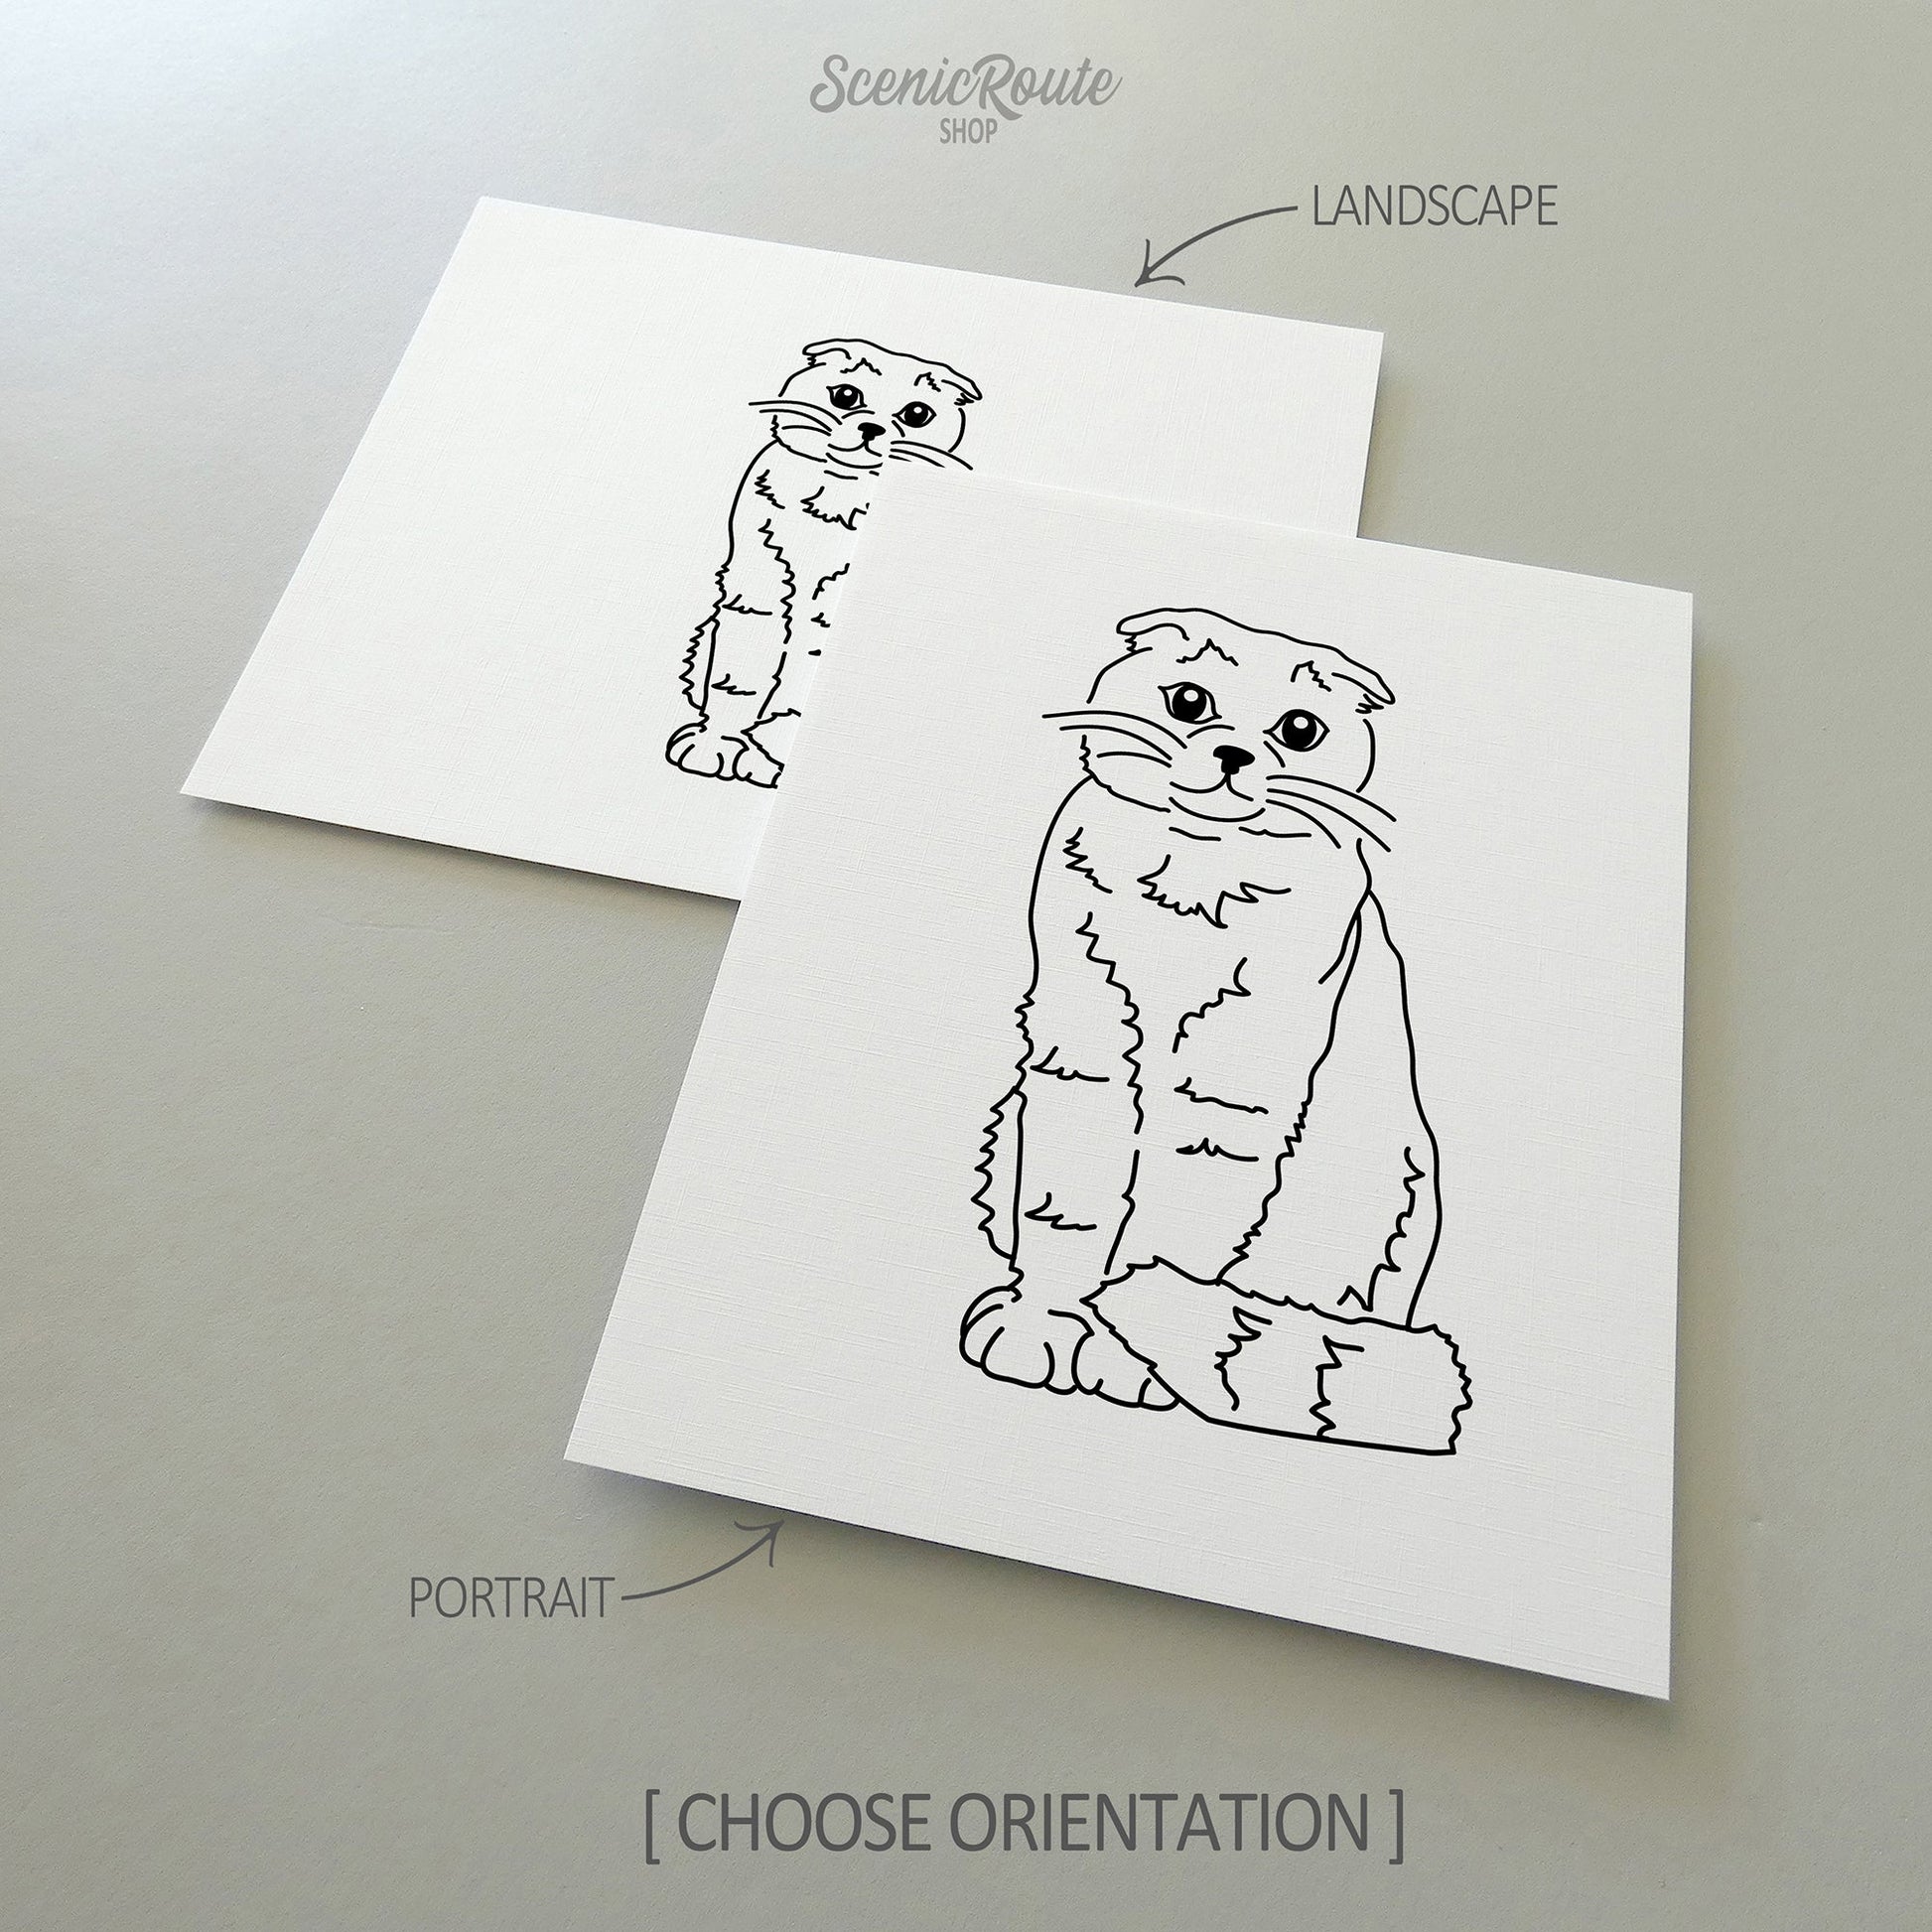 Two line art drawings of a Scottish Fold cat on white linen paper with a gray background.  The pieces are shown in portrait and landscape orientation for the available art print options.